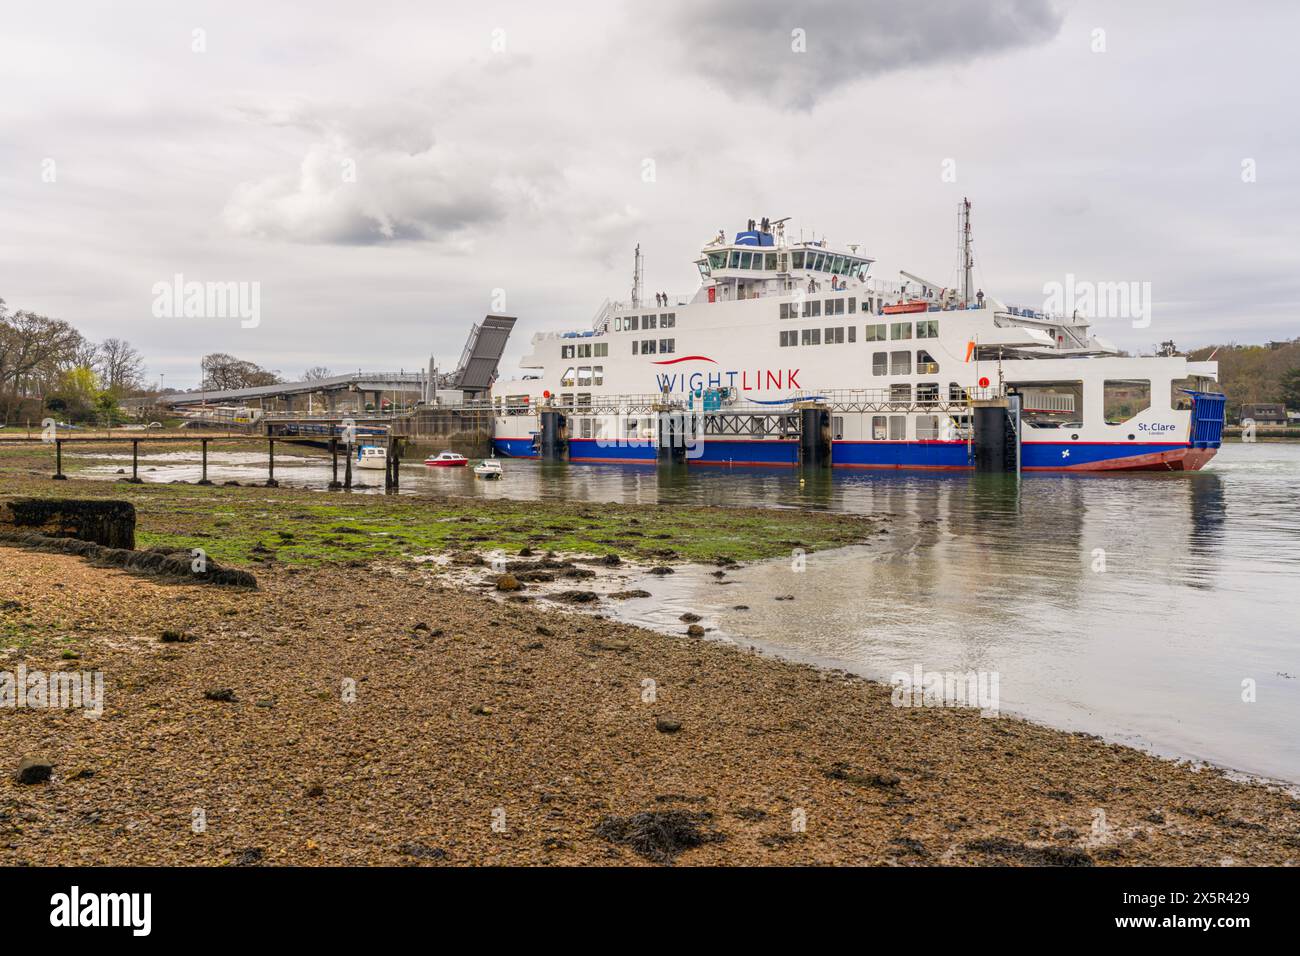 Fishbourne, Isle of Wight, England, UK - April 16, 2023: A ferry in the harbour Stock Photo